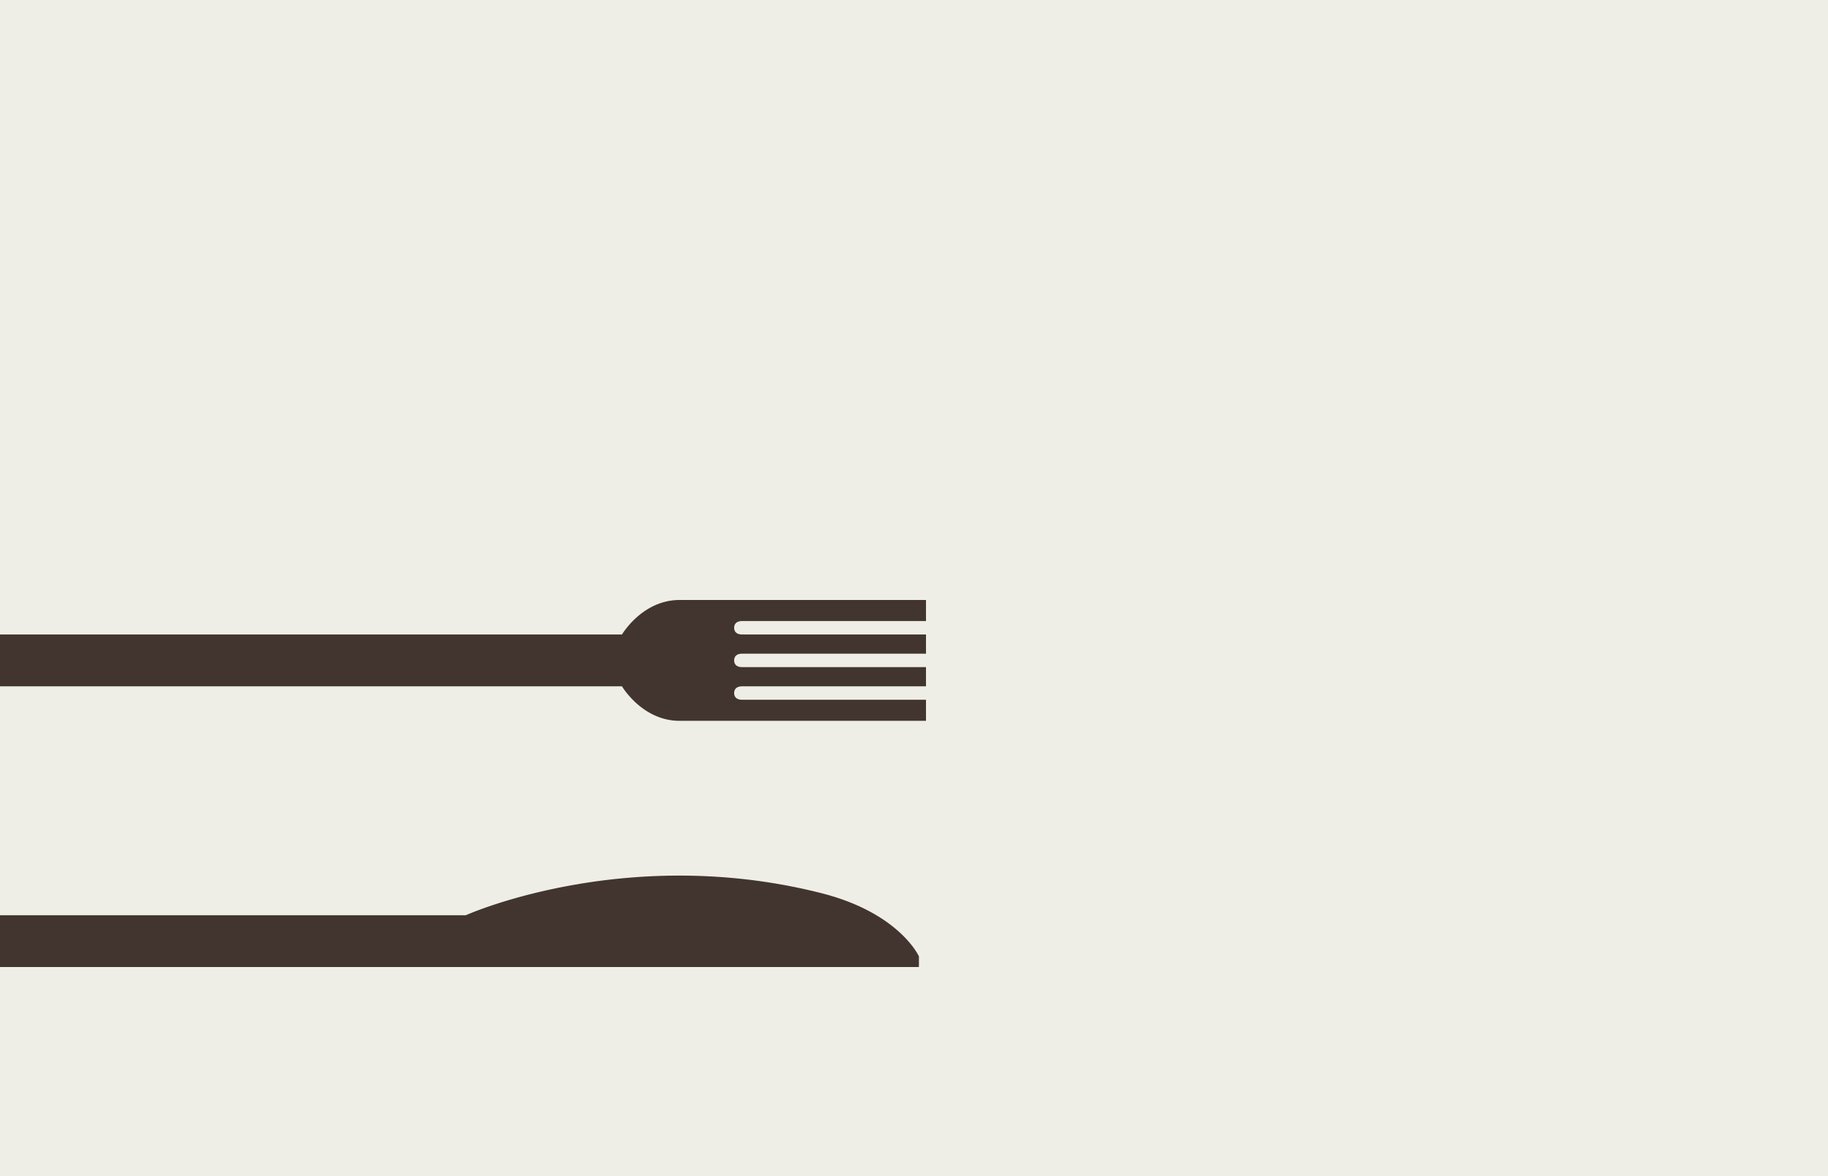 My Main Course Knife & Fork Graphic